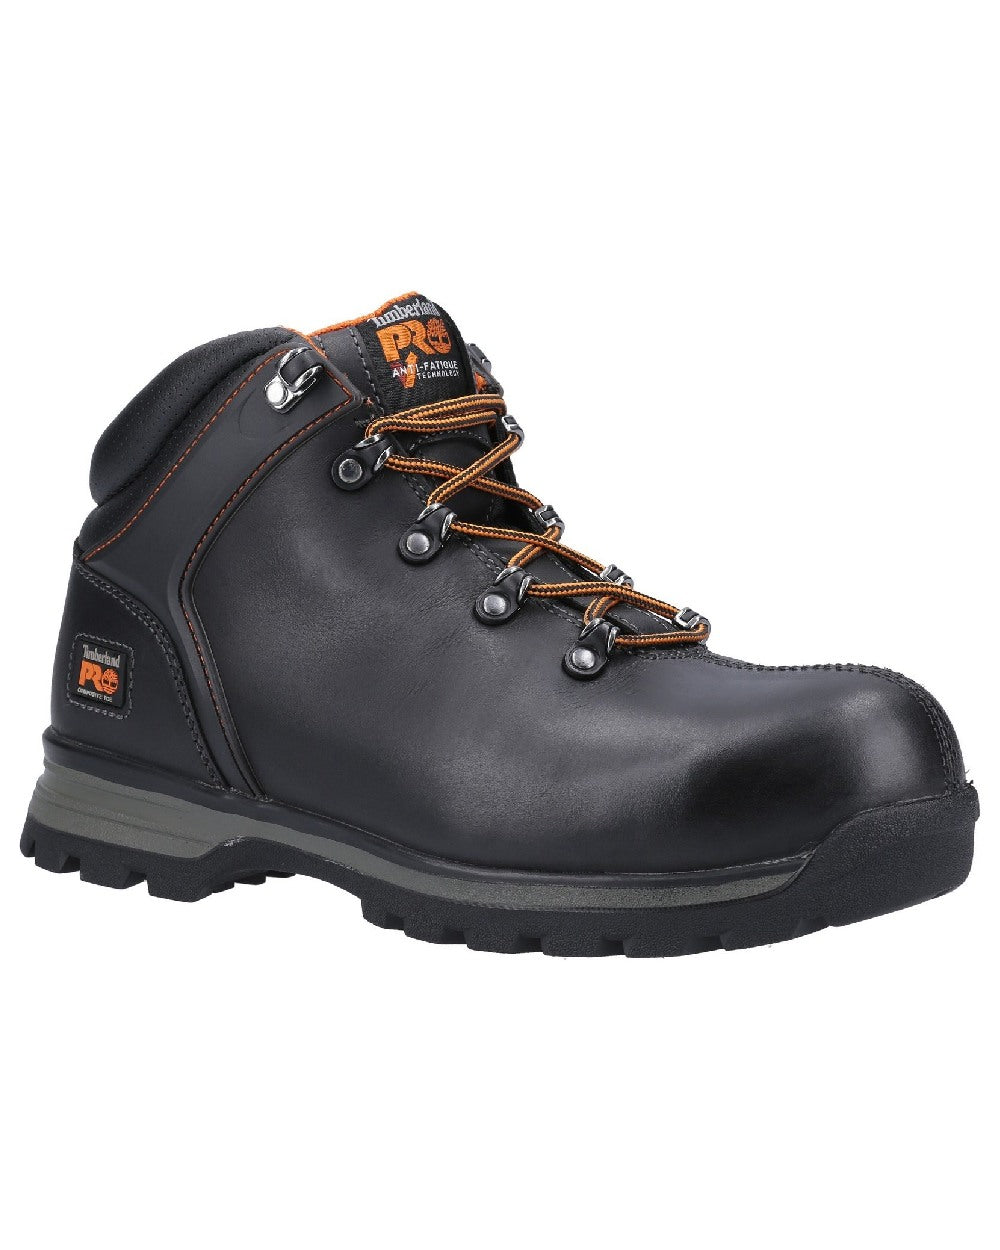 Black coloured Timberland Pro Splitrock XT Composite Safety Toe Work Boots on white background 